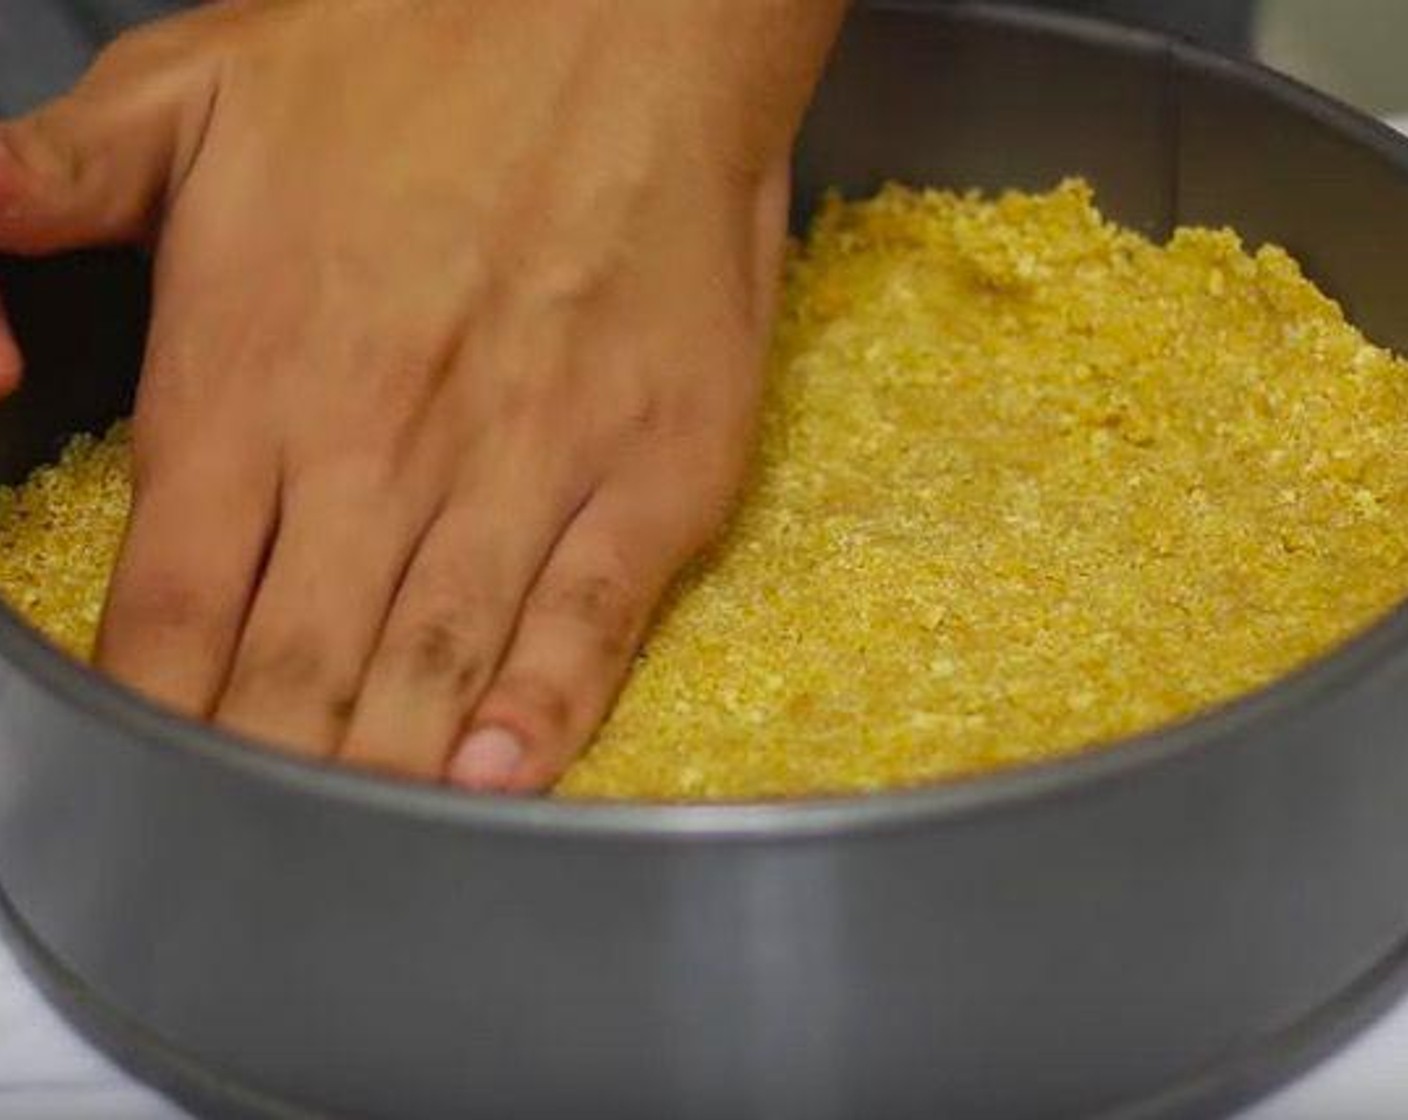 step 1 In a large bowl, add Butter (1 stick), Graham Crackers (14), Granulated Sugar (1/4 cup), and mix it together. Take a 9 inch springform pan, place the crumbs in there and use hand to form a crust.